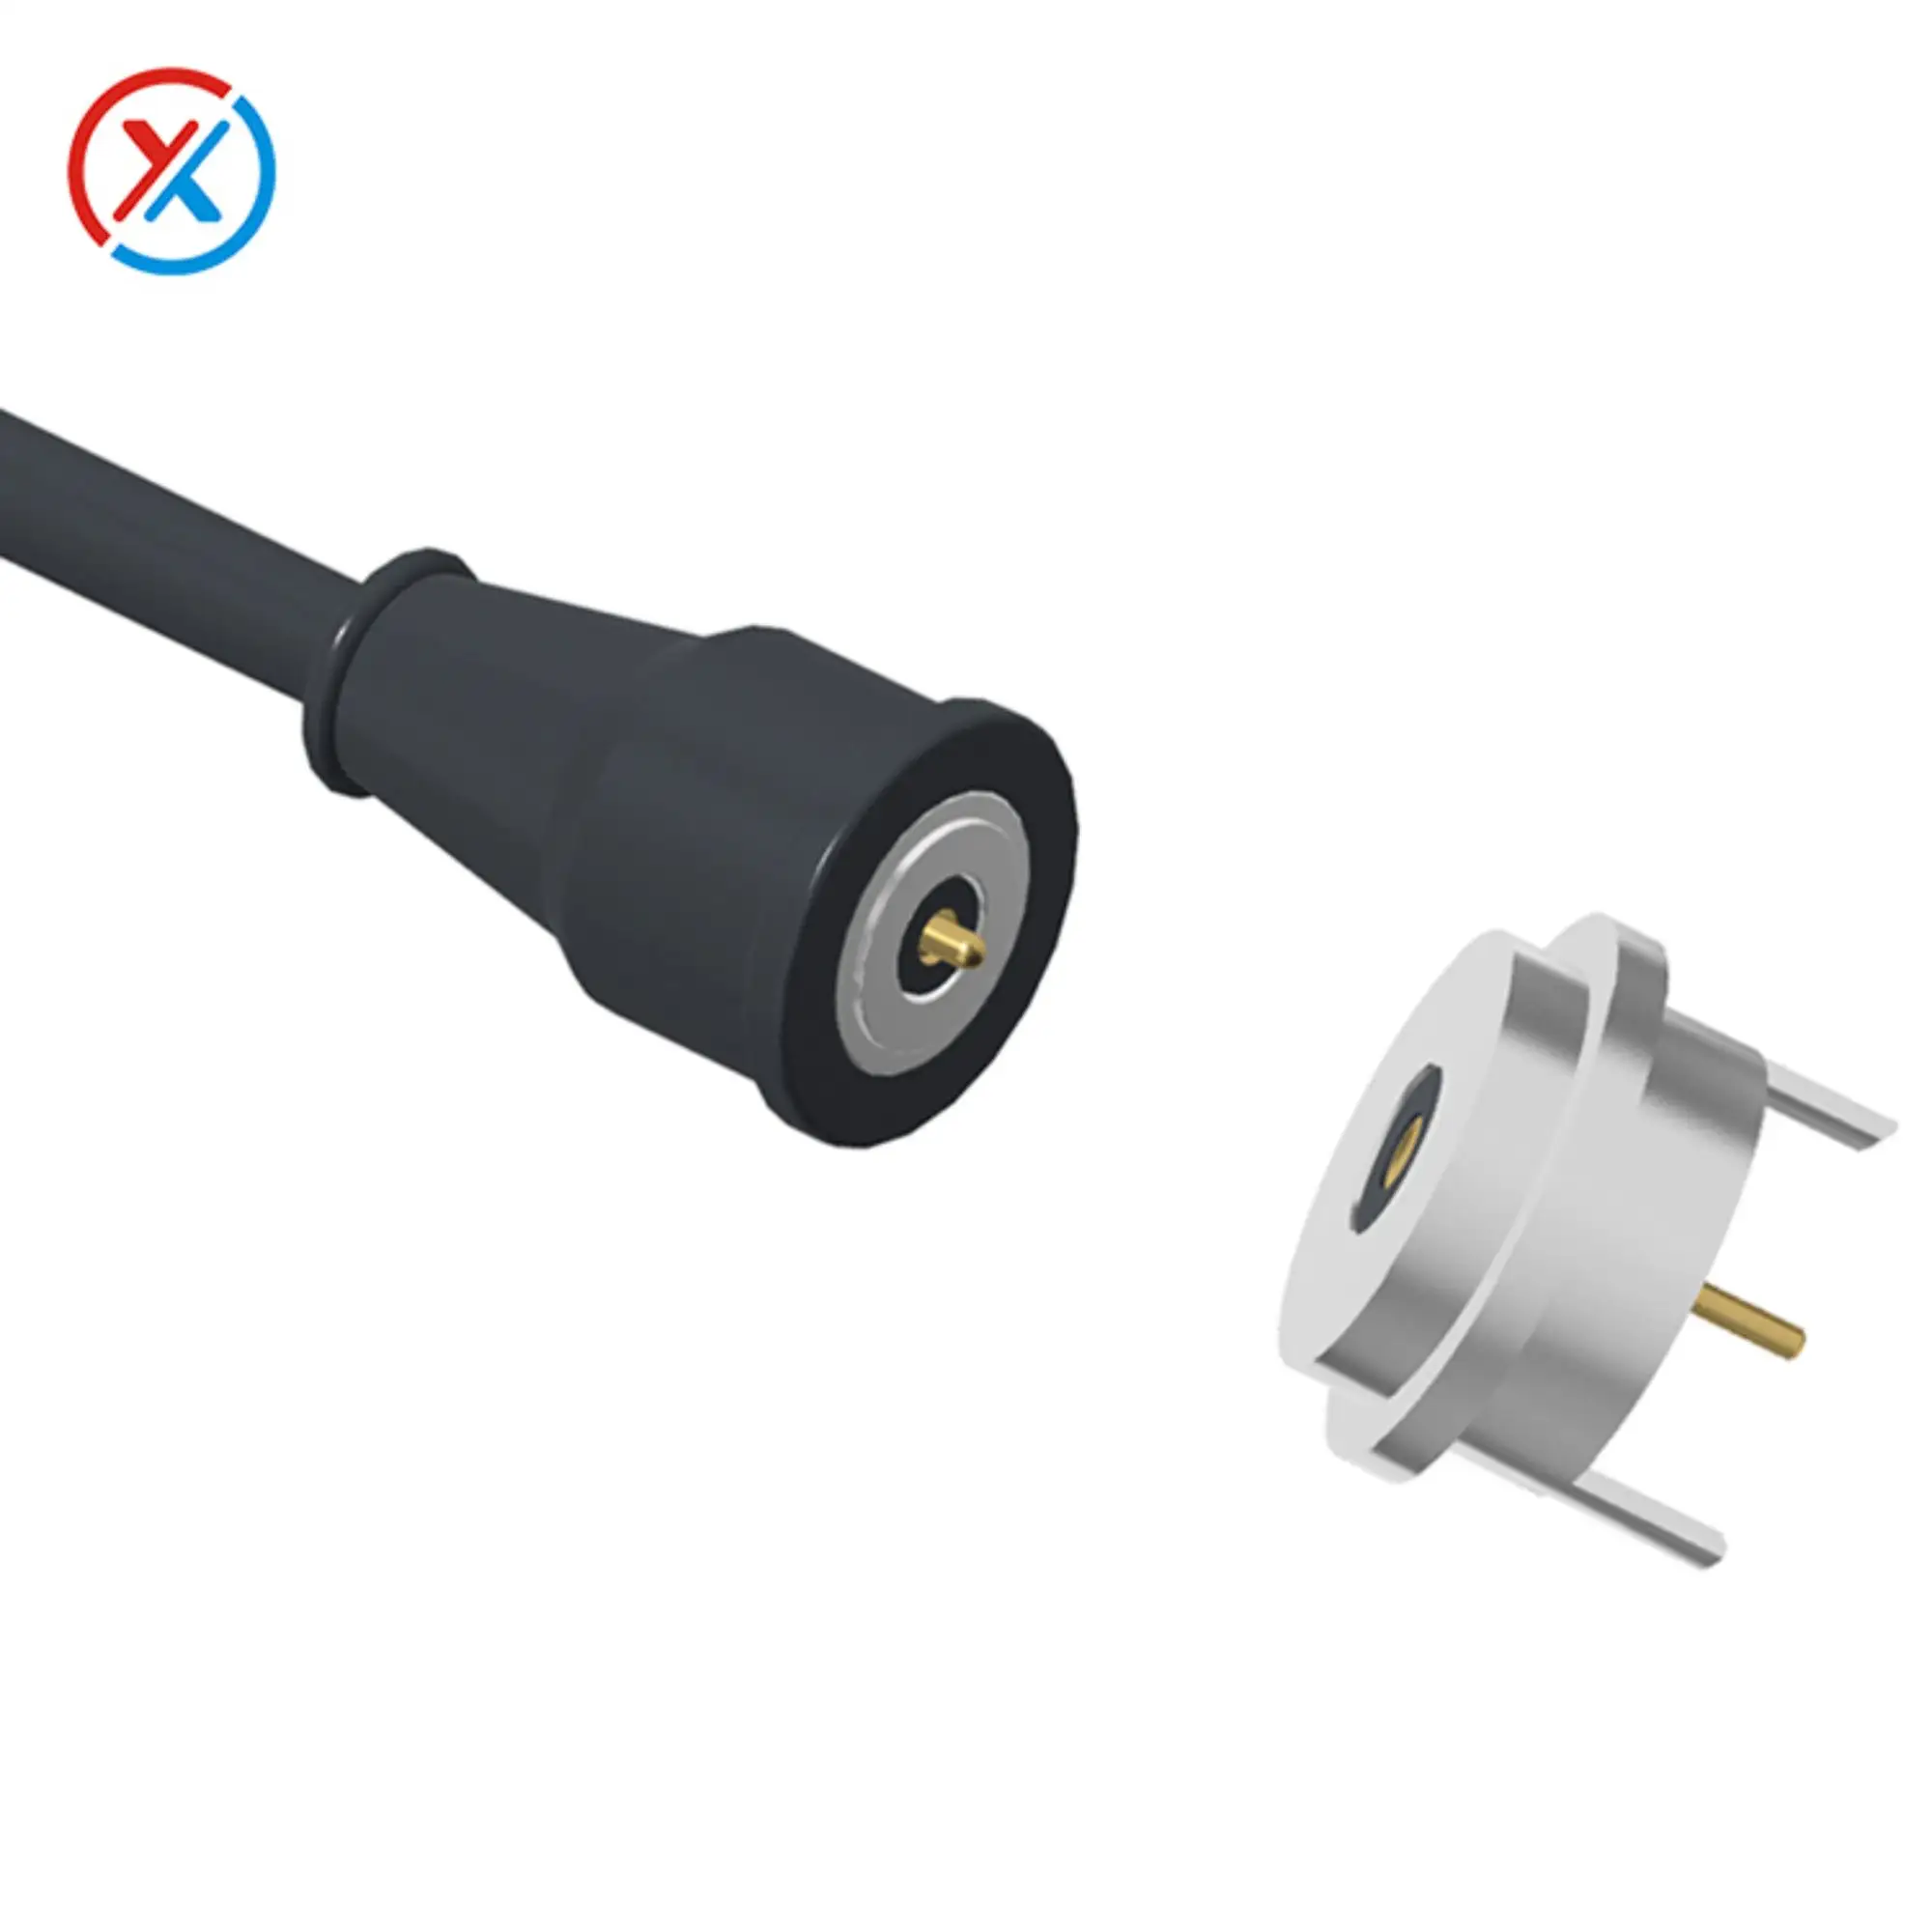 The Metal Magnetic Data Cable Redefining Connectivity